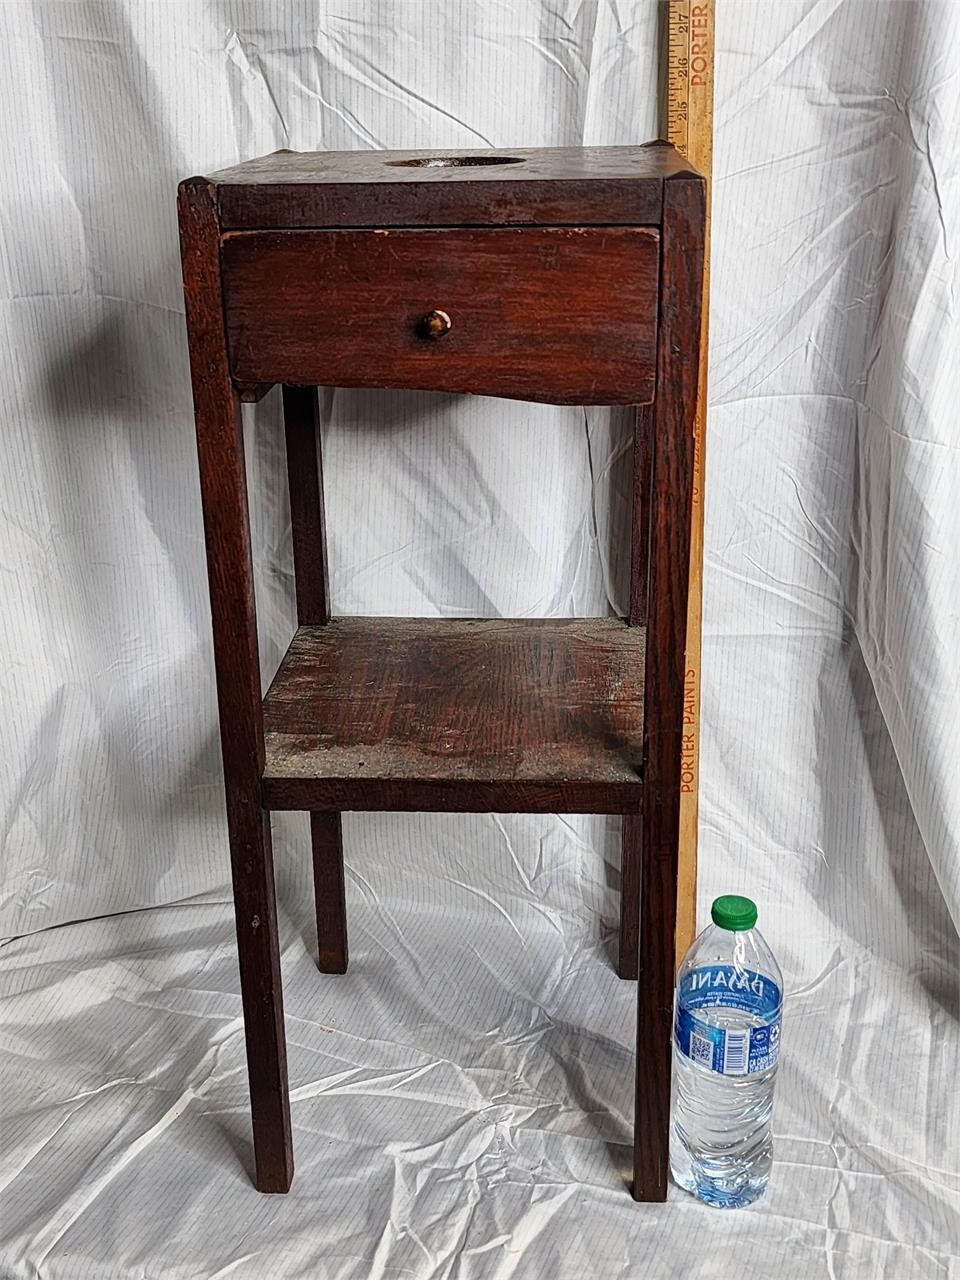 Antique  one drawer smoking stand